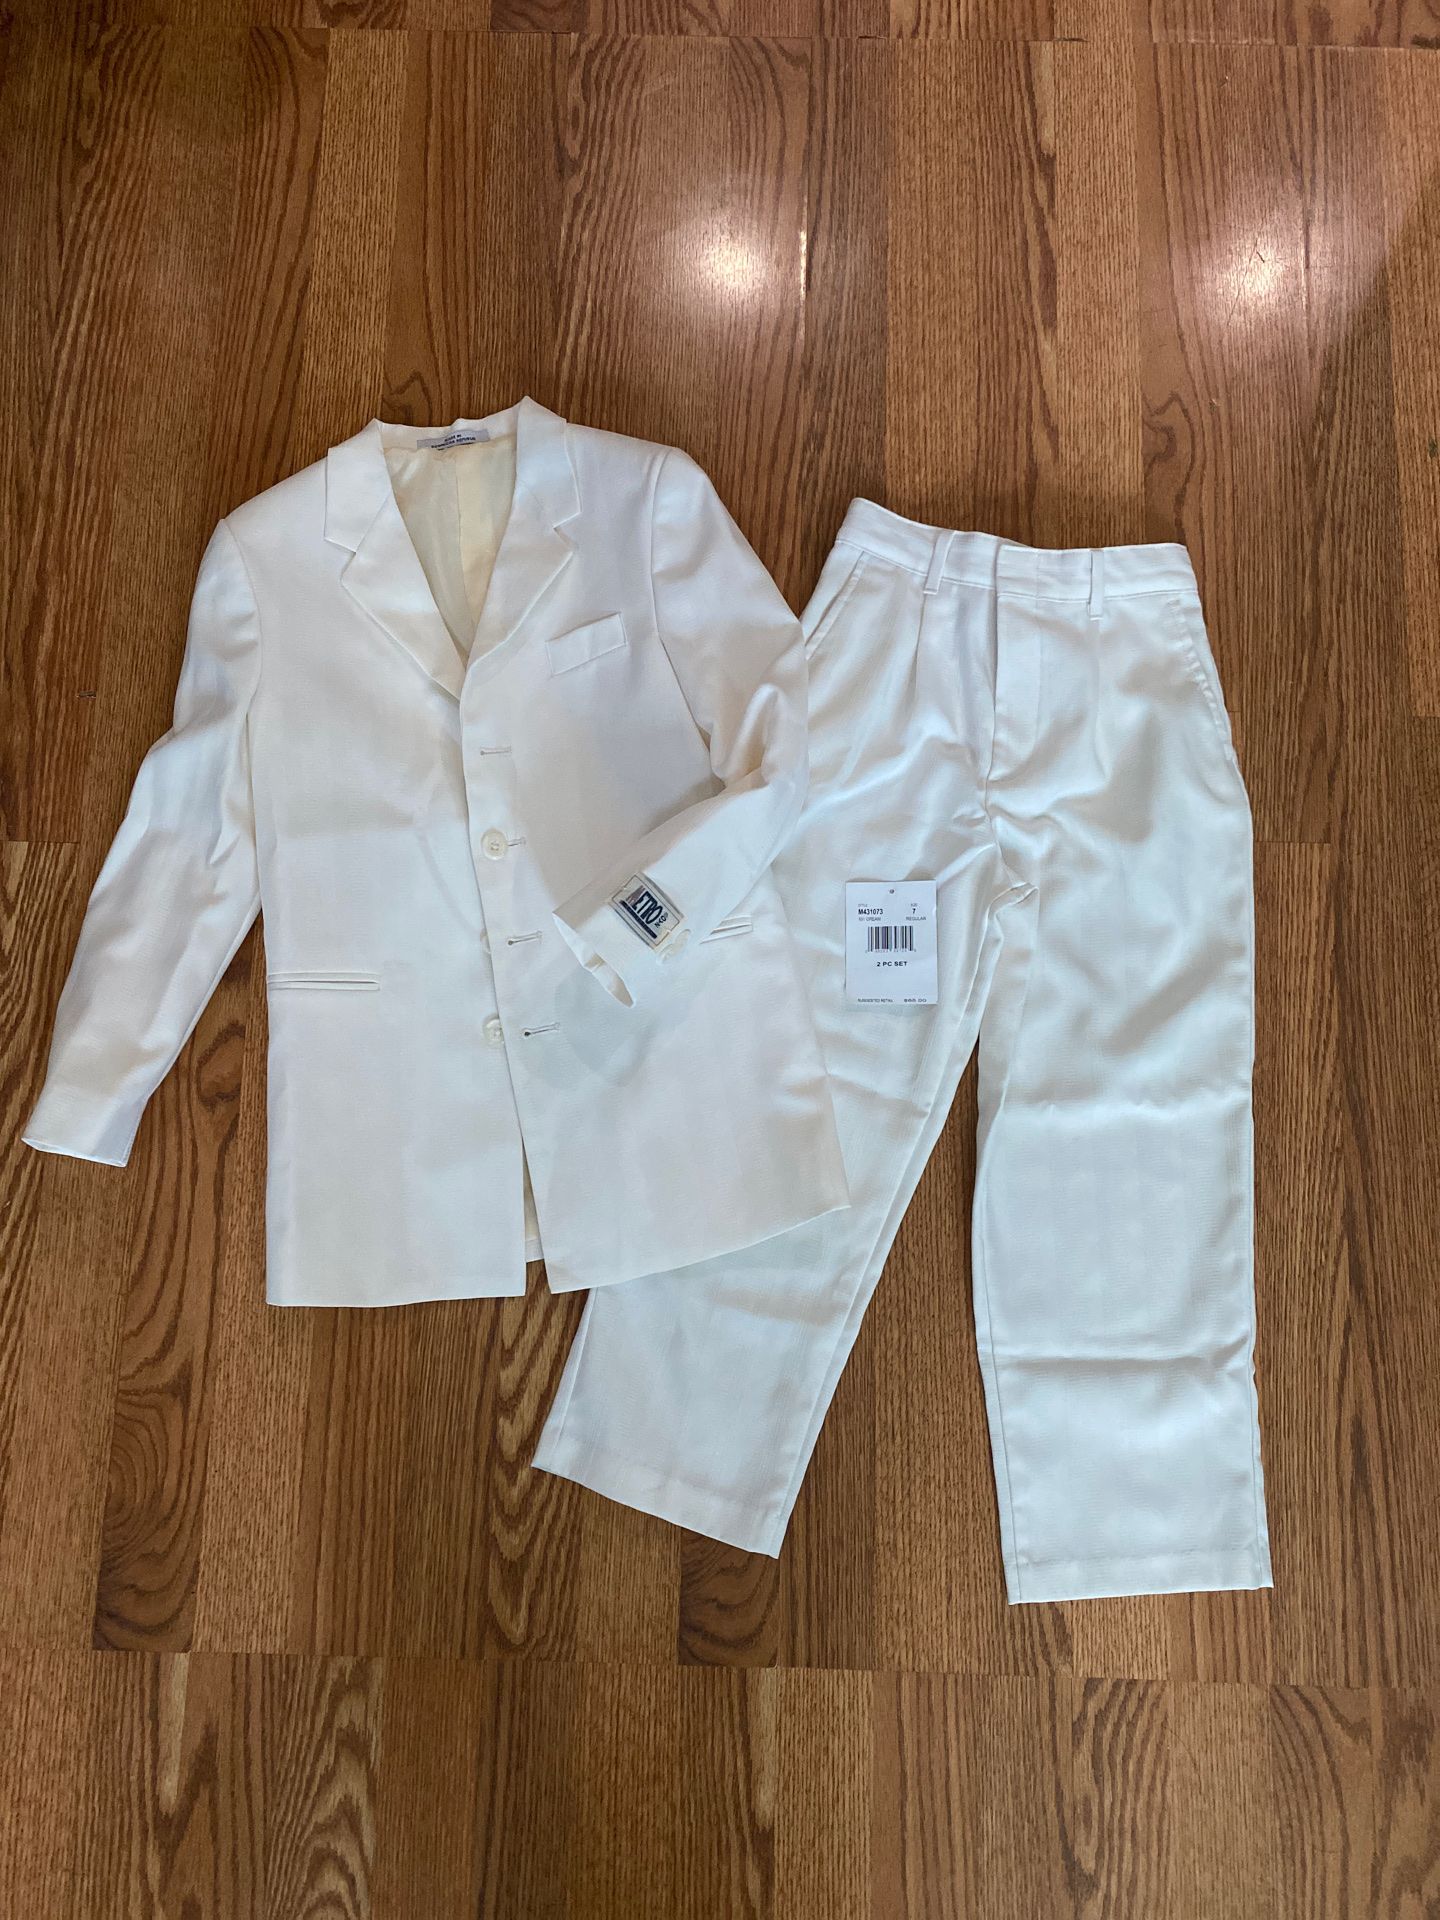 BOY’S MATCHING SUIT JACKET and PANTS